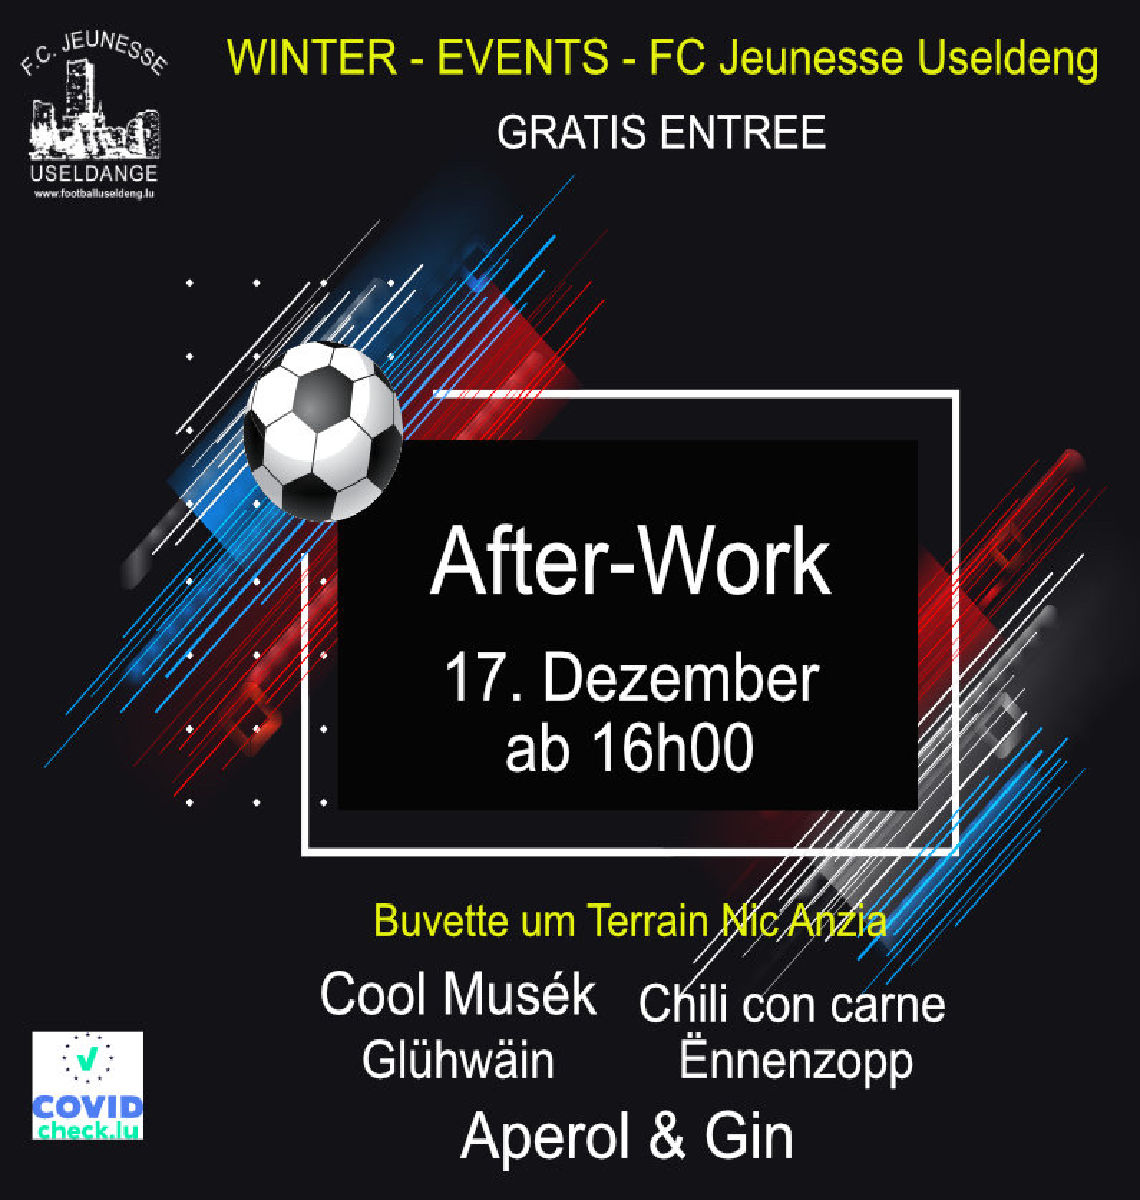 After-Work 17.12.2021 